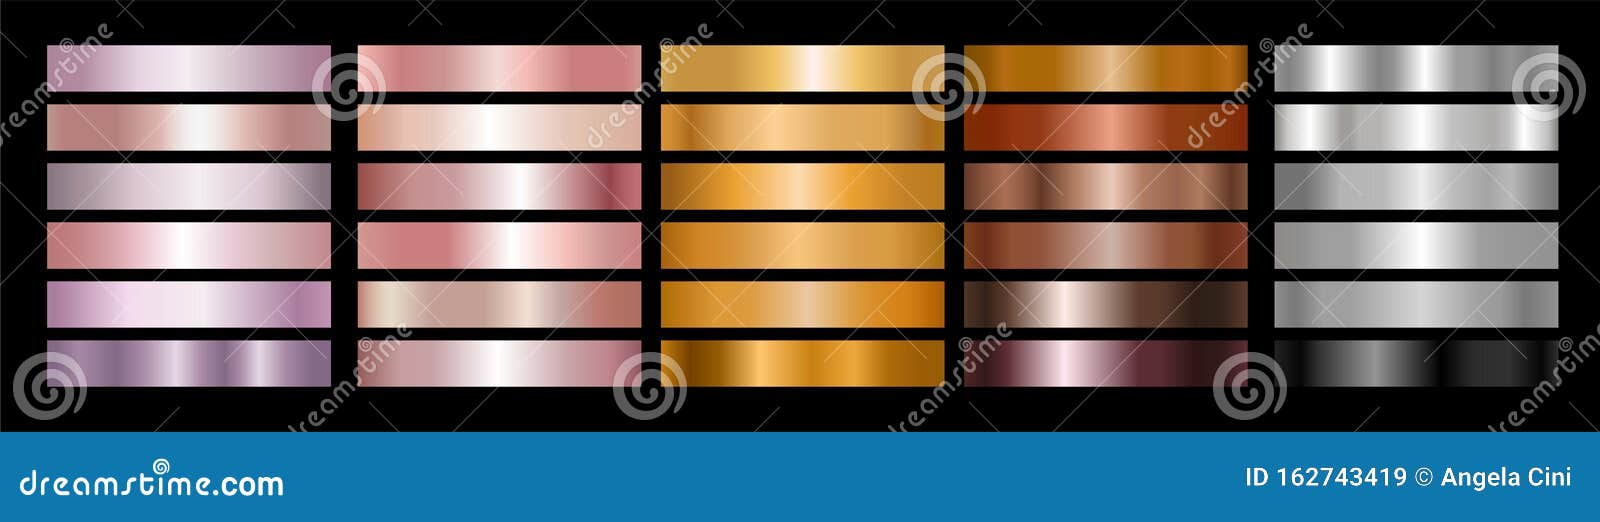 metal gradient collection of rose gold, golden, bronze and silver swatches